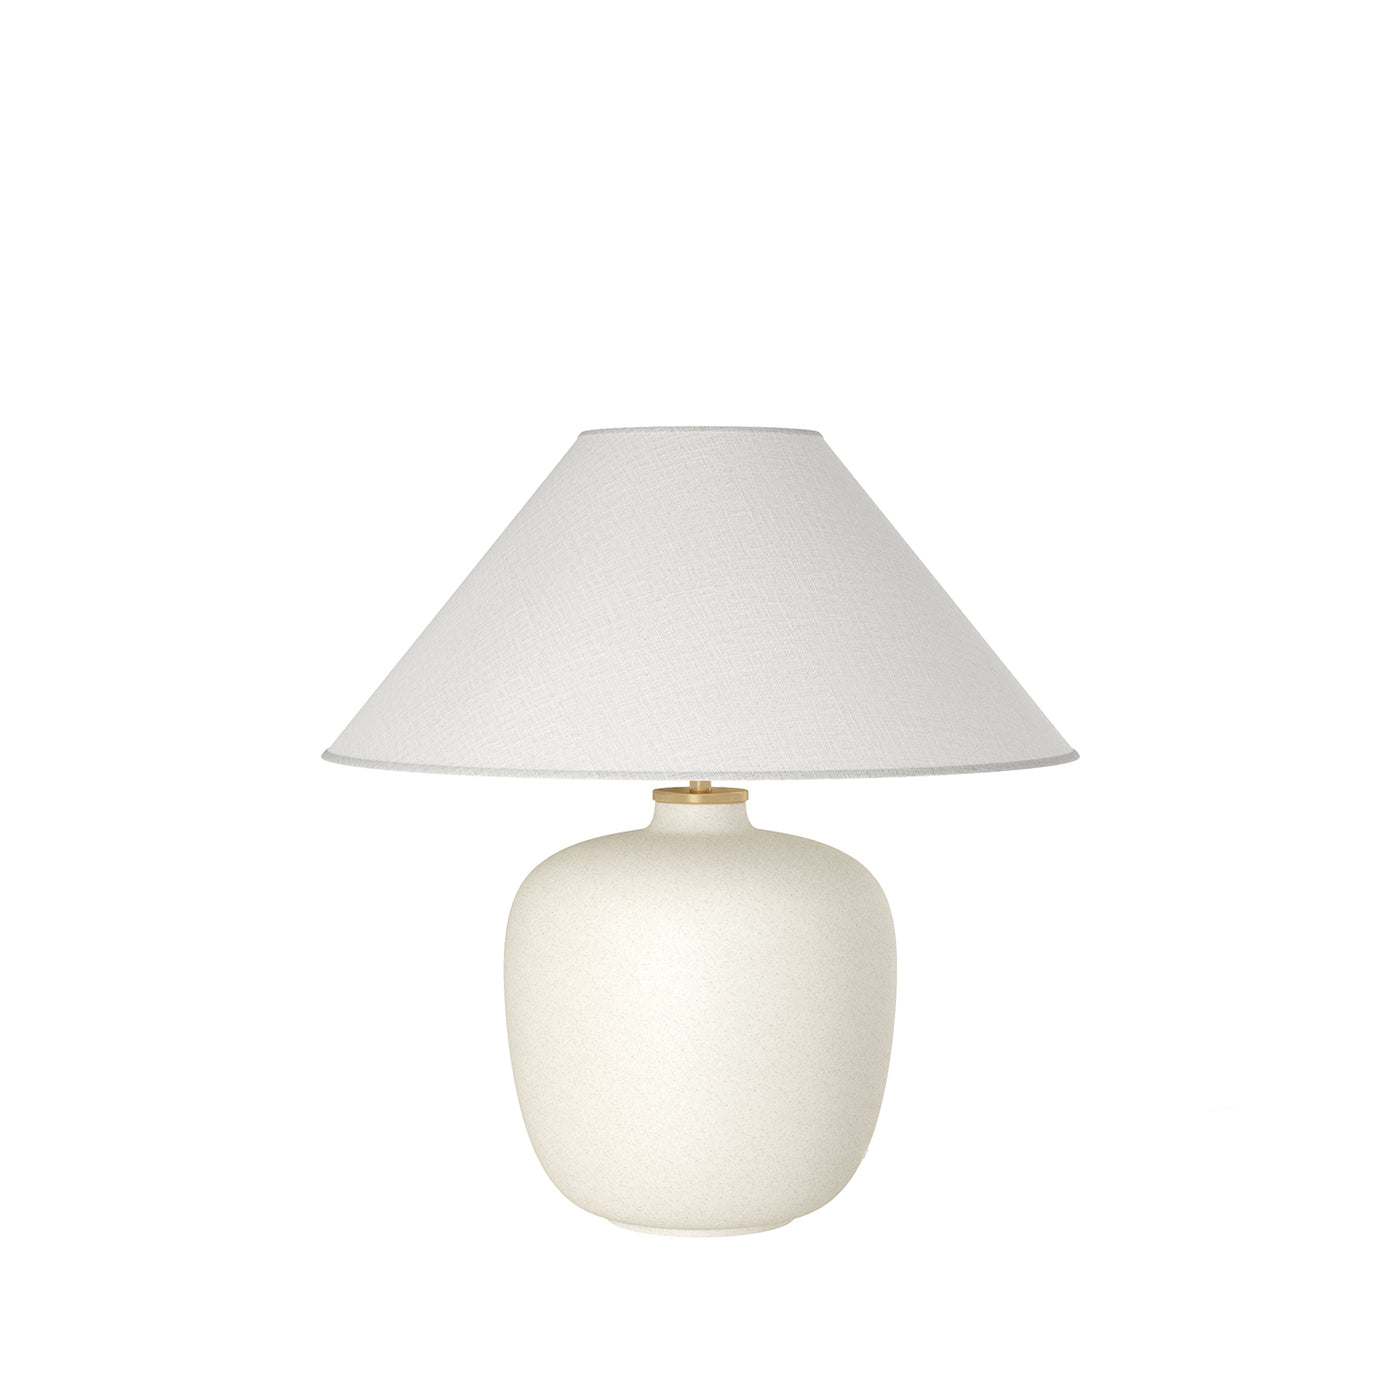 torso lamp, traditional table lamp, Menu space, dimmable lighting, 